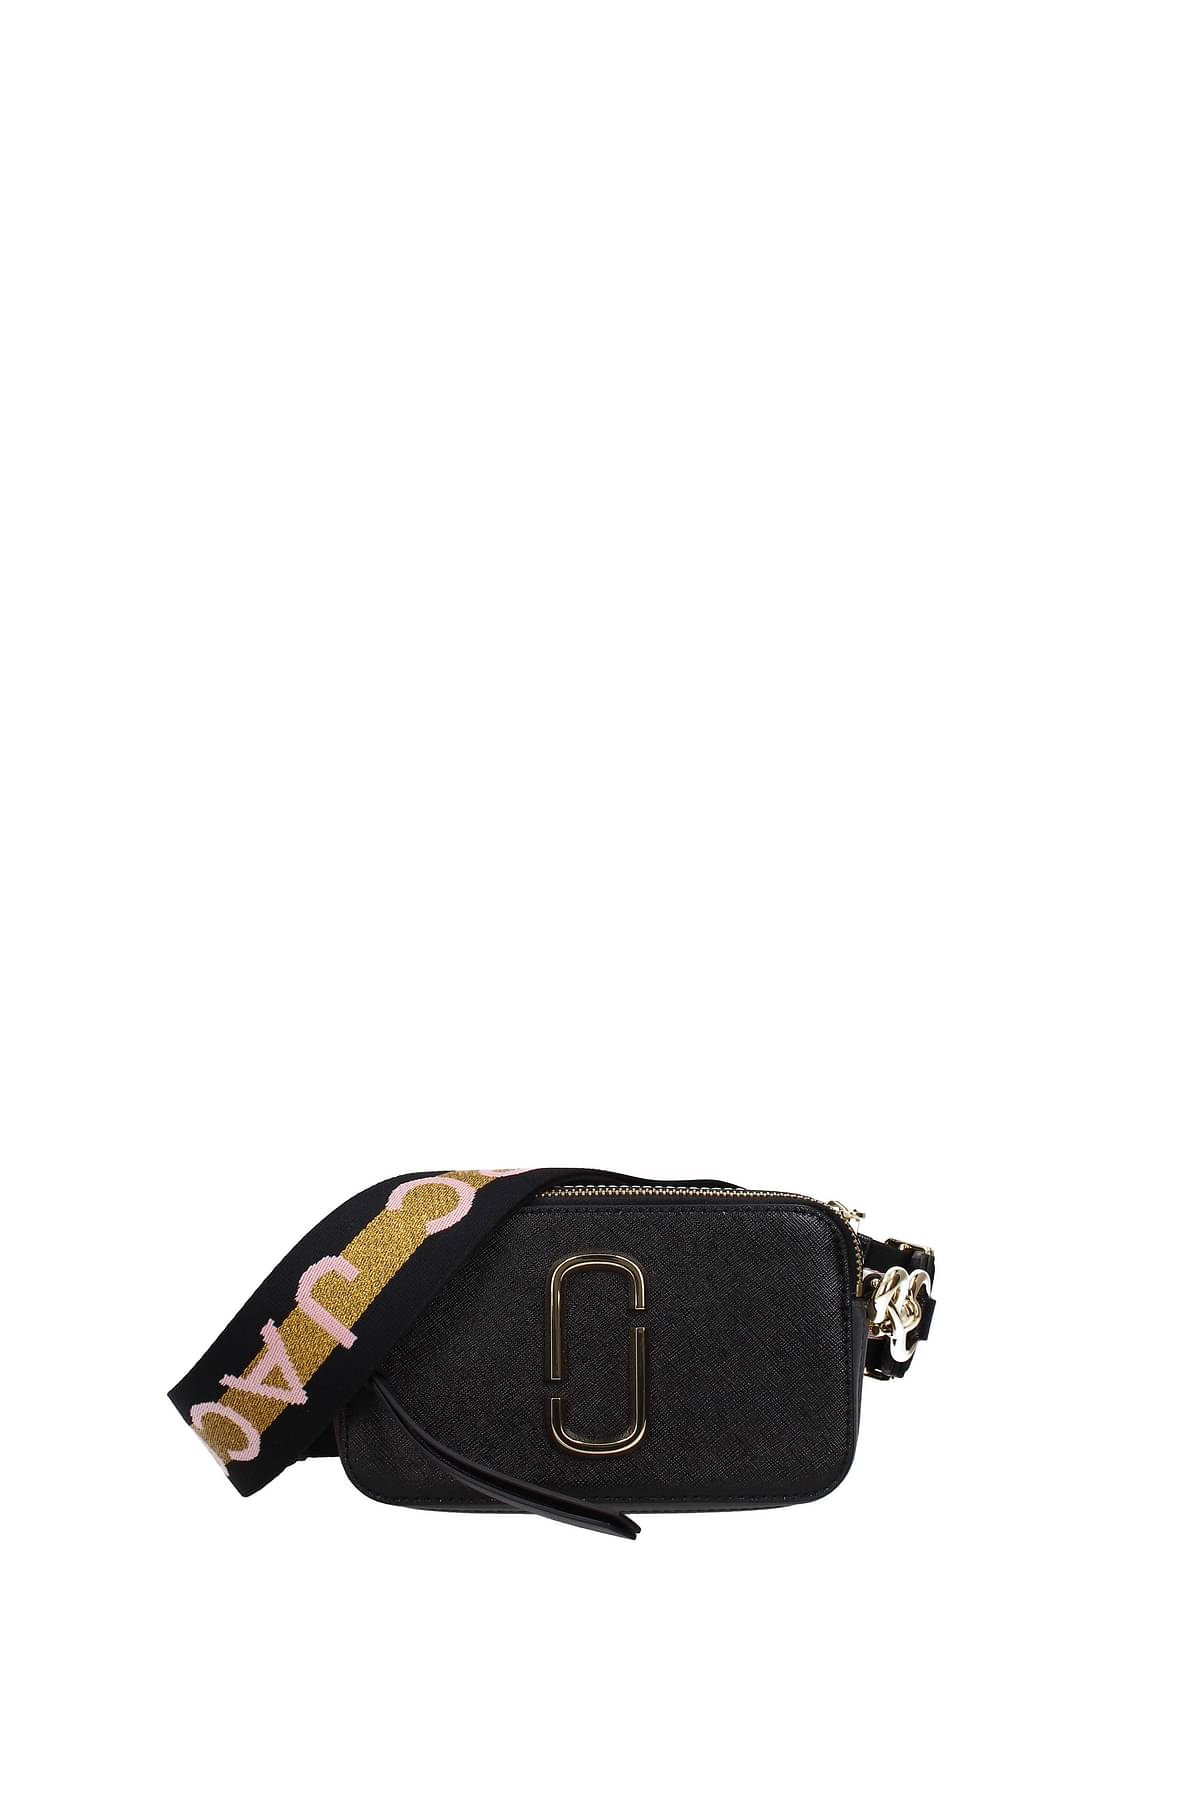 Authentic Marc Jacobs Snapshot All Black, Women's Fashion, Bags